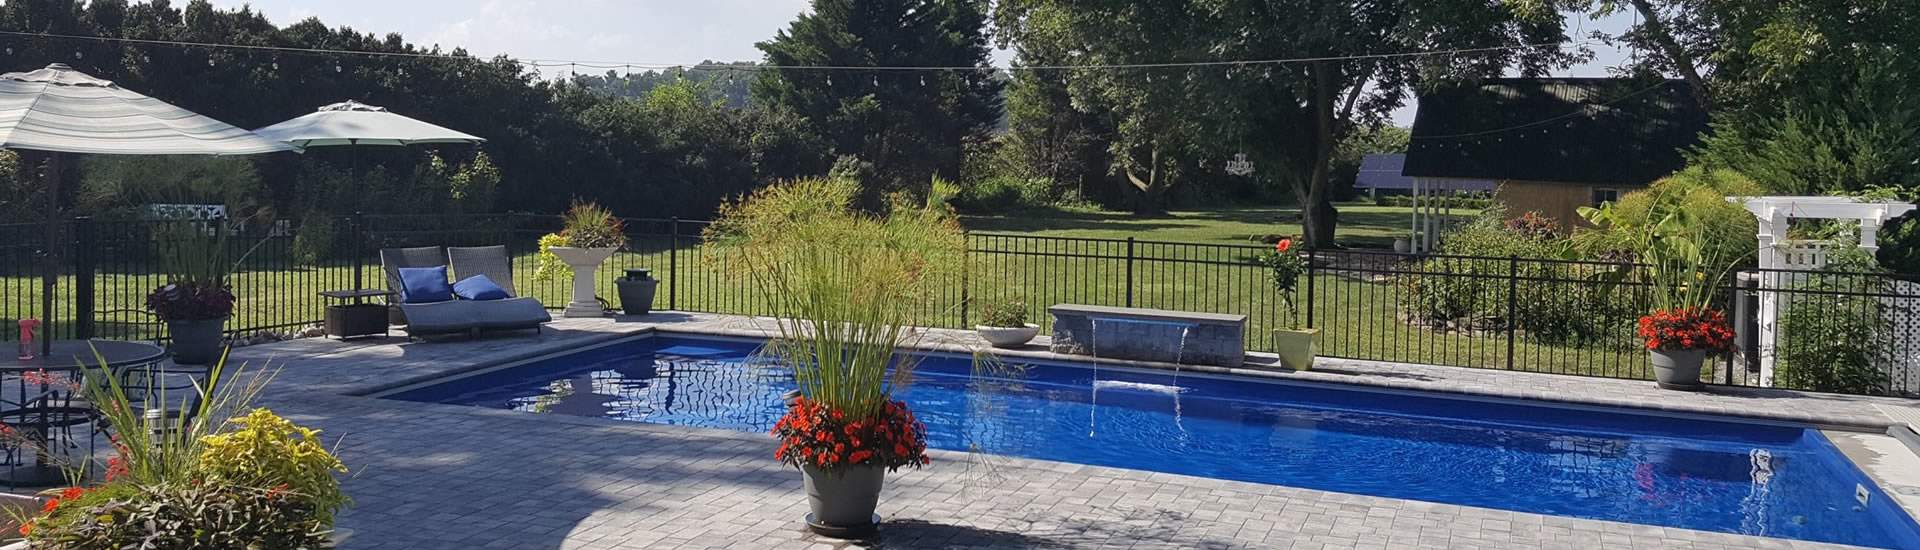 Blue swimming pool sourrounded by an iron fence with tall trees and grass lawn in the background.